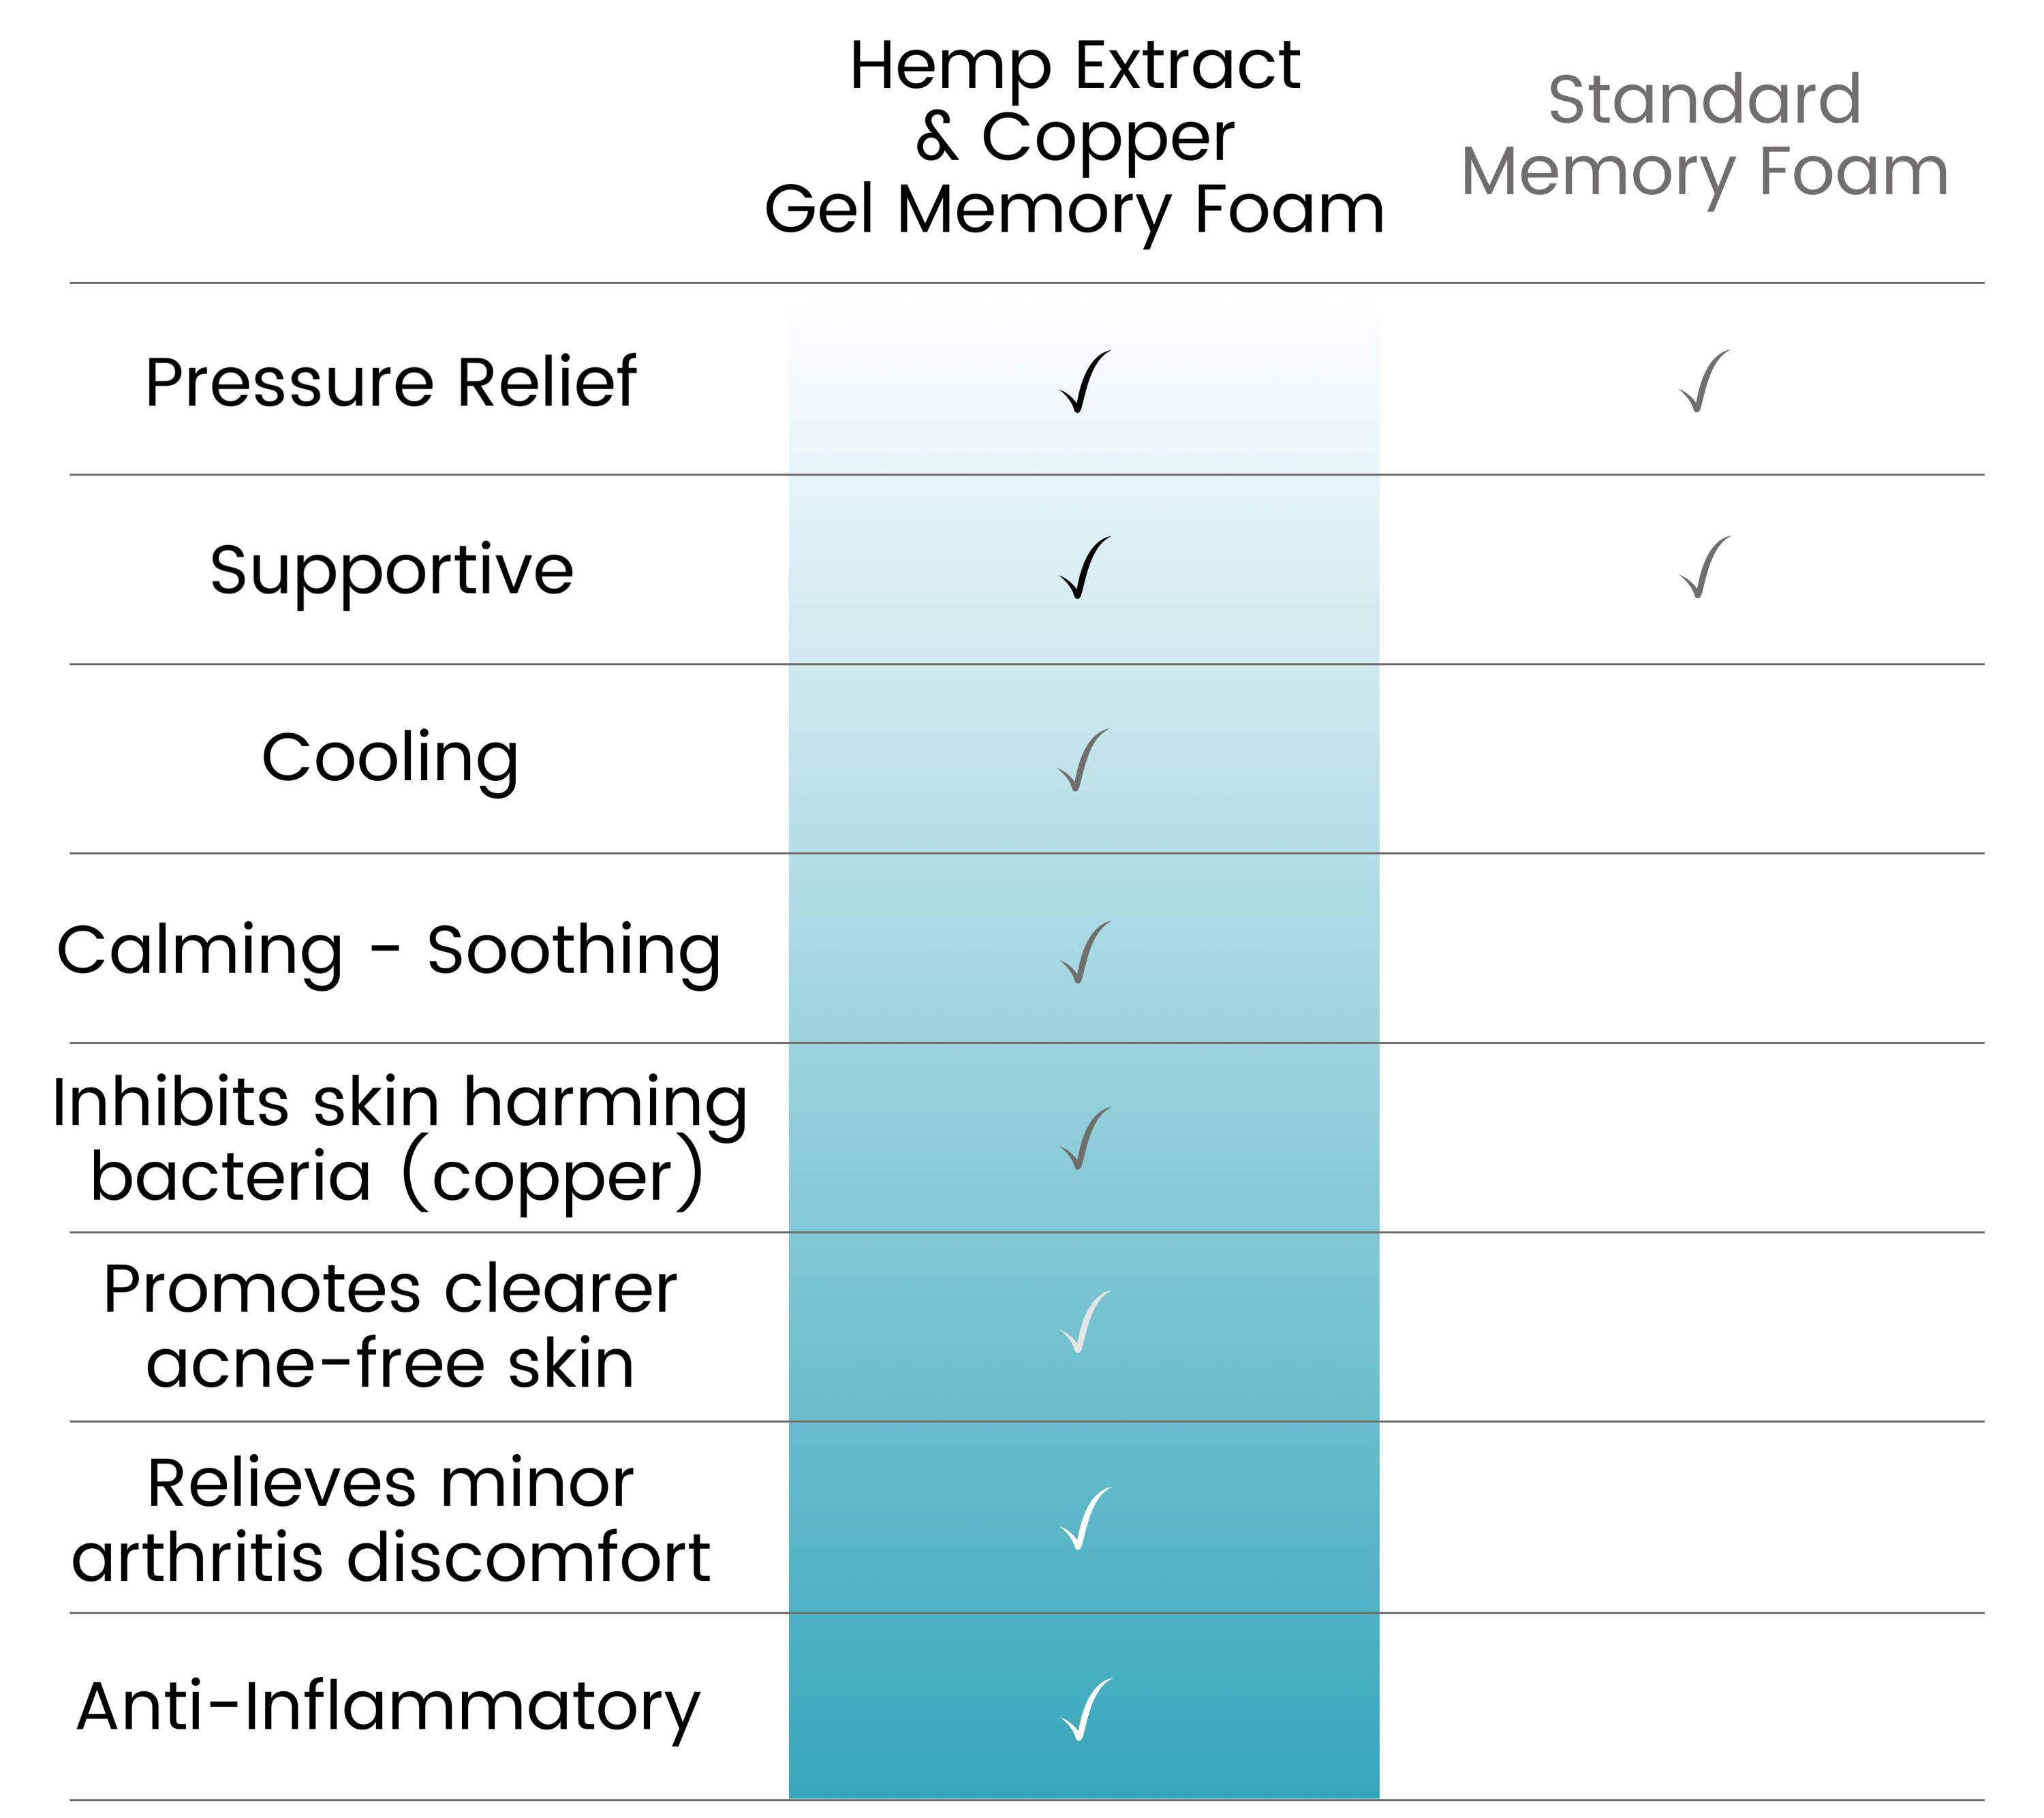 Ergo-Pedic's CBD and copper memory foam has the benefits of pressure relief, support, cooling, calming, inhibits bacteria, promotes clearer acne-free skin, relieves minor arthritis discomfort, and is anti-inflammatory.